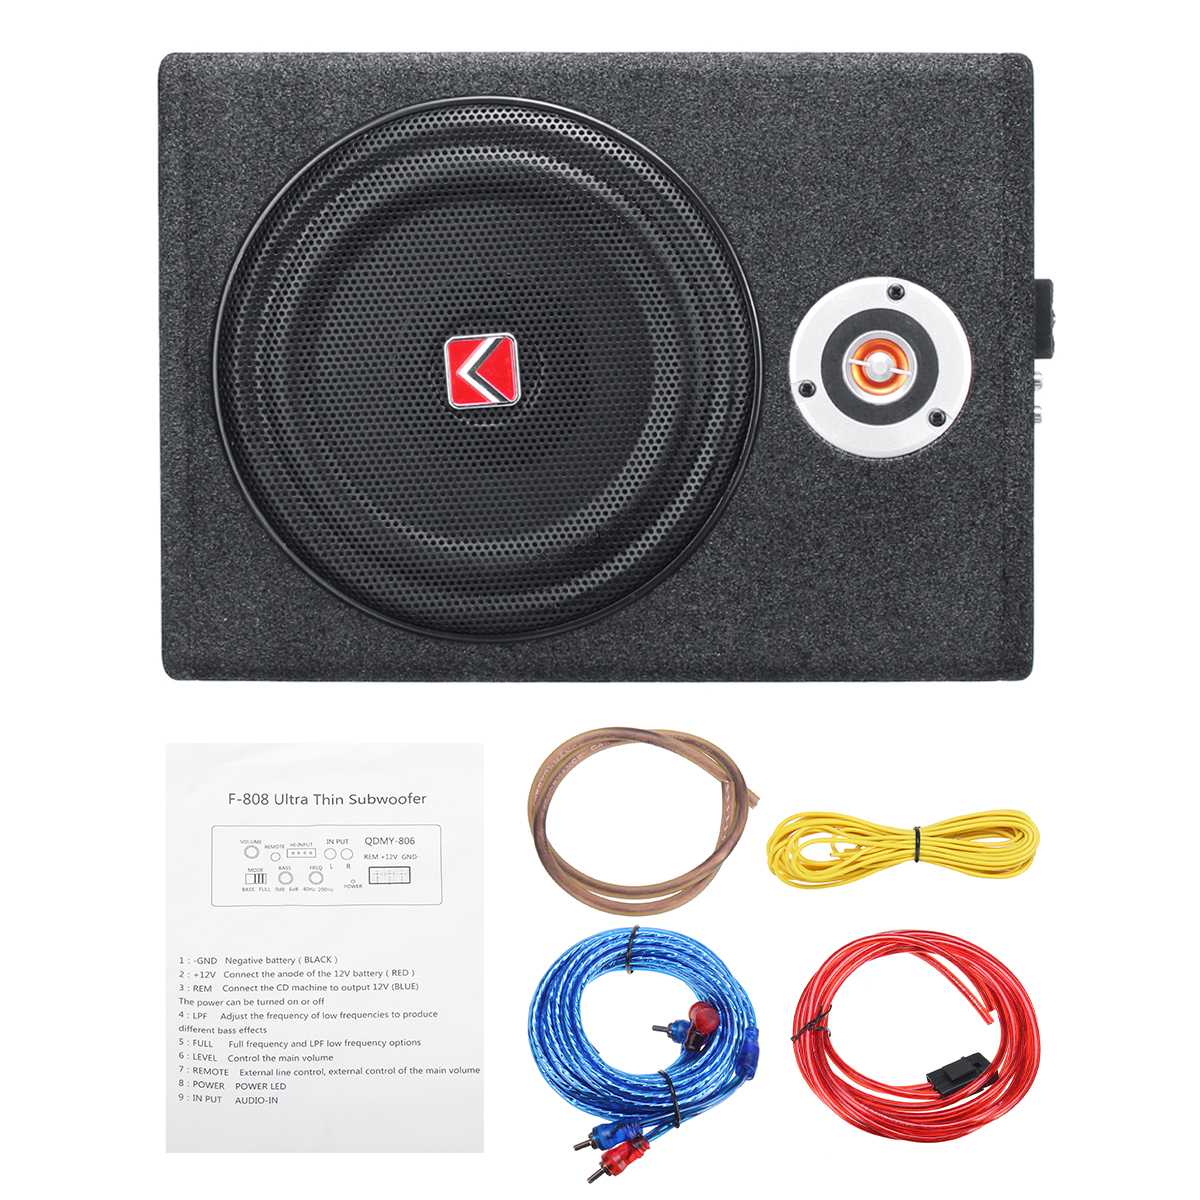 8 Inch 600W Under-Seat Car Subwoofer Modified Speaker Stereo Audio Bass Amplifier Subwoofers Car Audio Auto Speakers